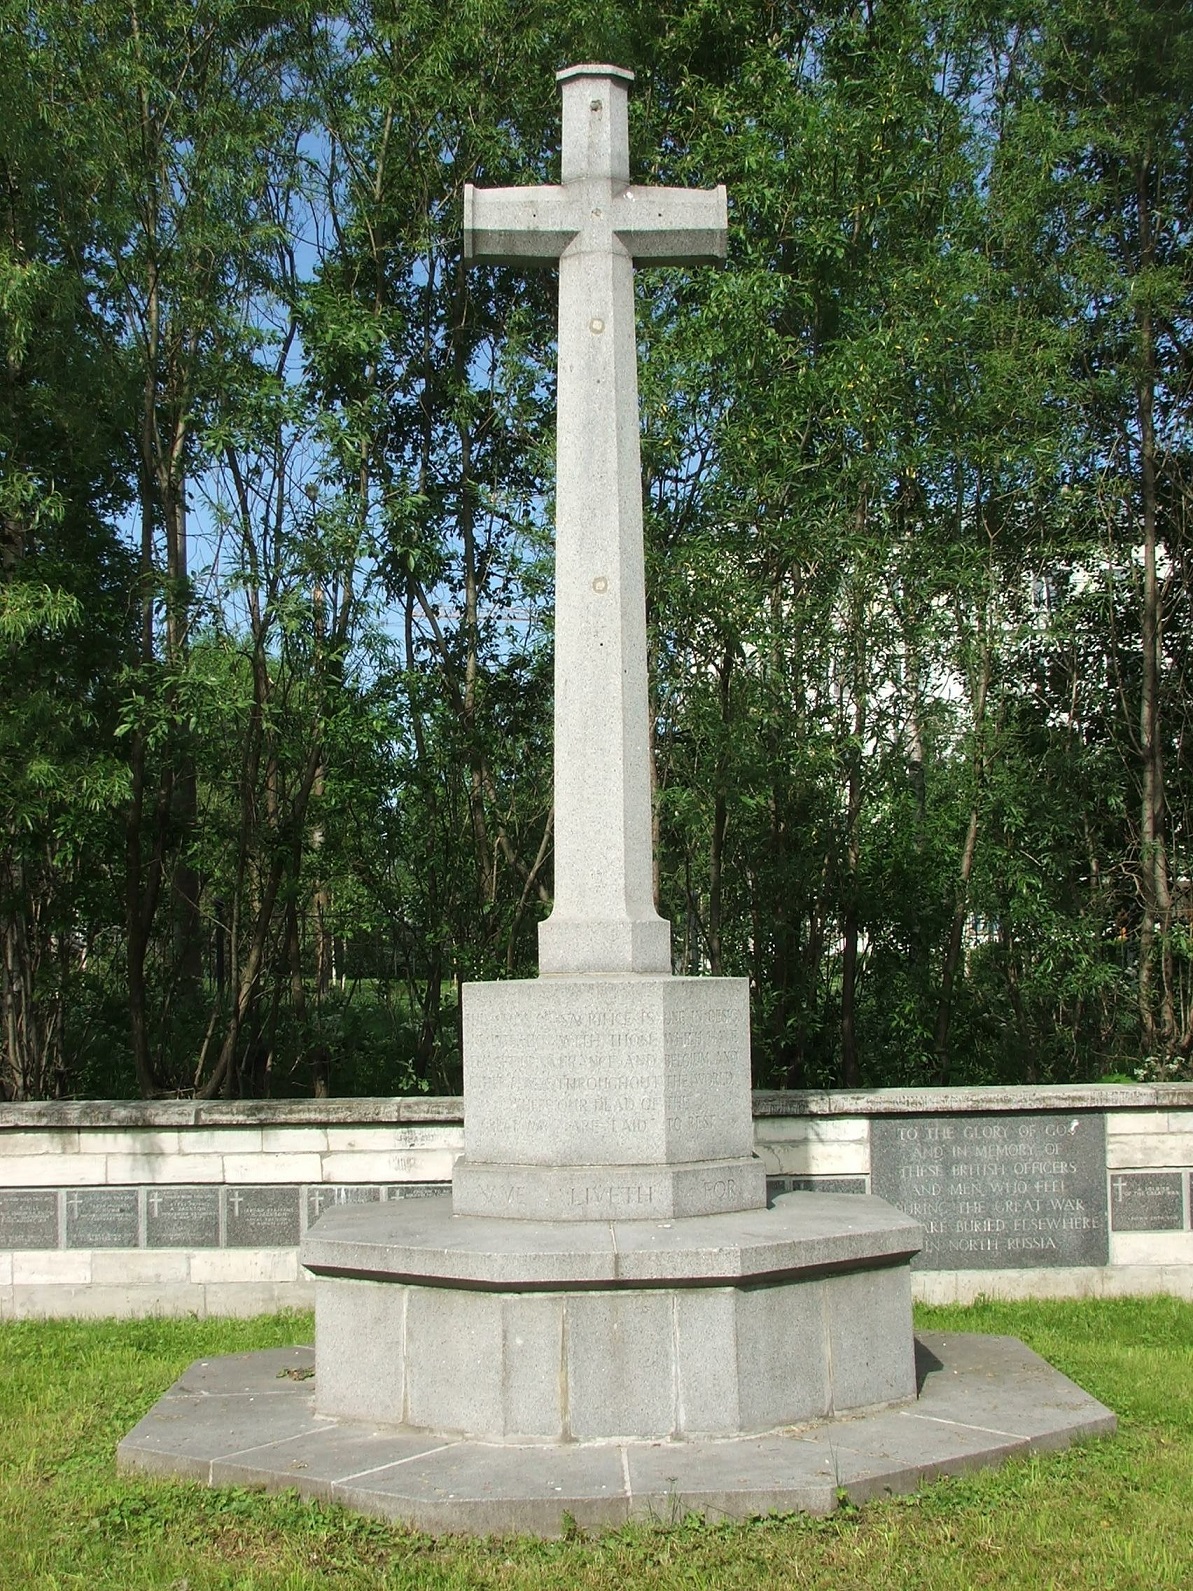 The Cross of Sacrifice in Archangel Allied Cemetery, Russia<br>Photograph courtesy of Pat Twomey